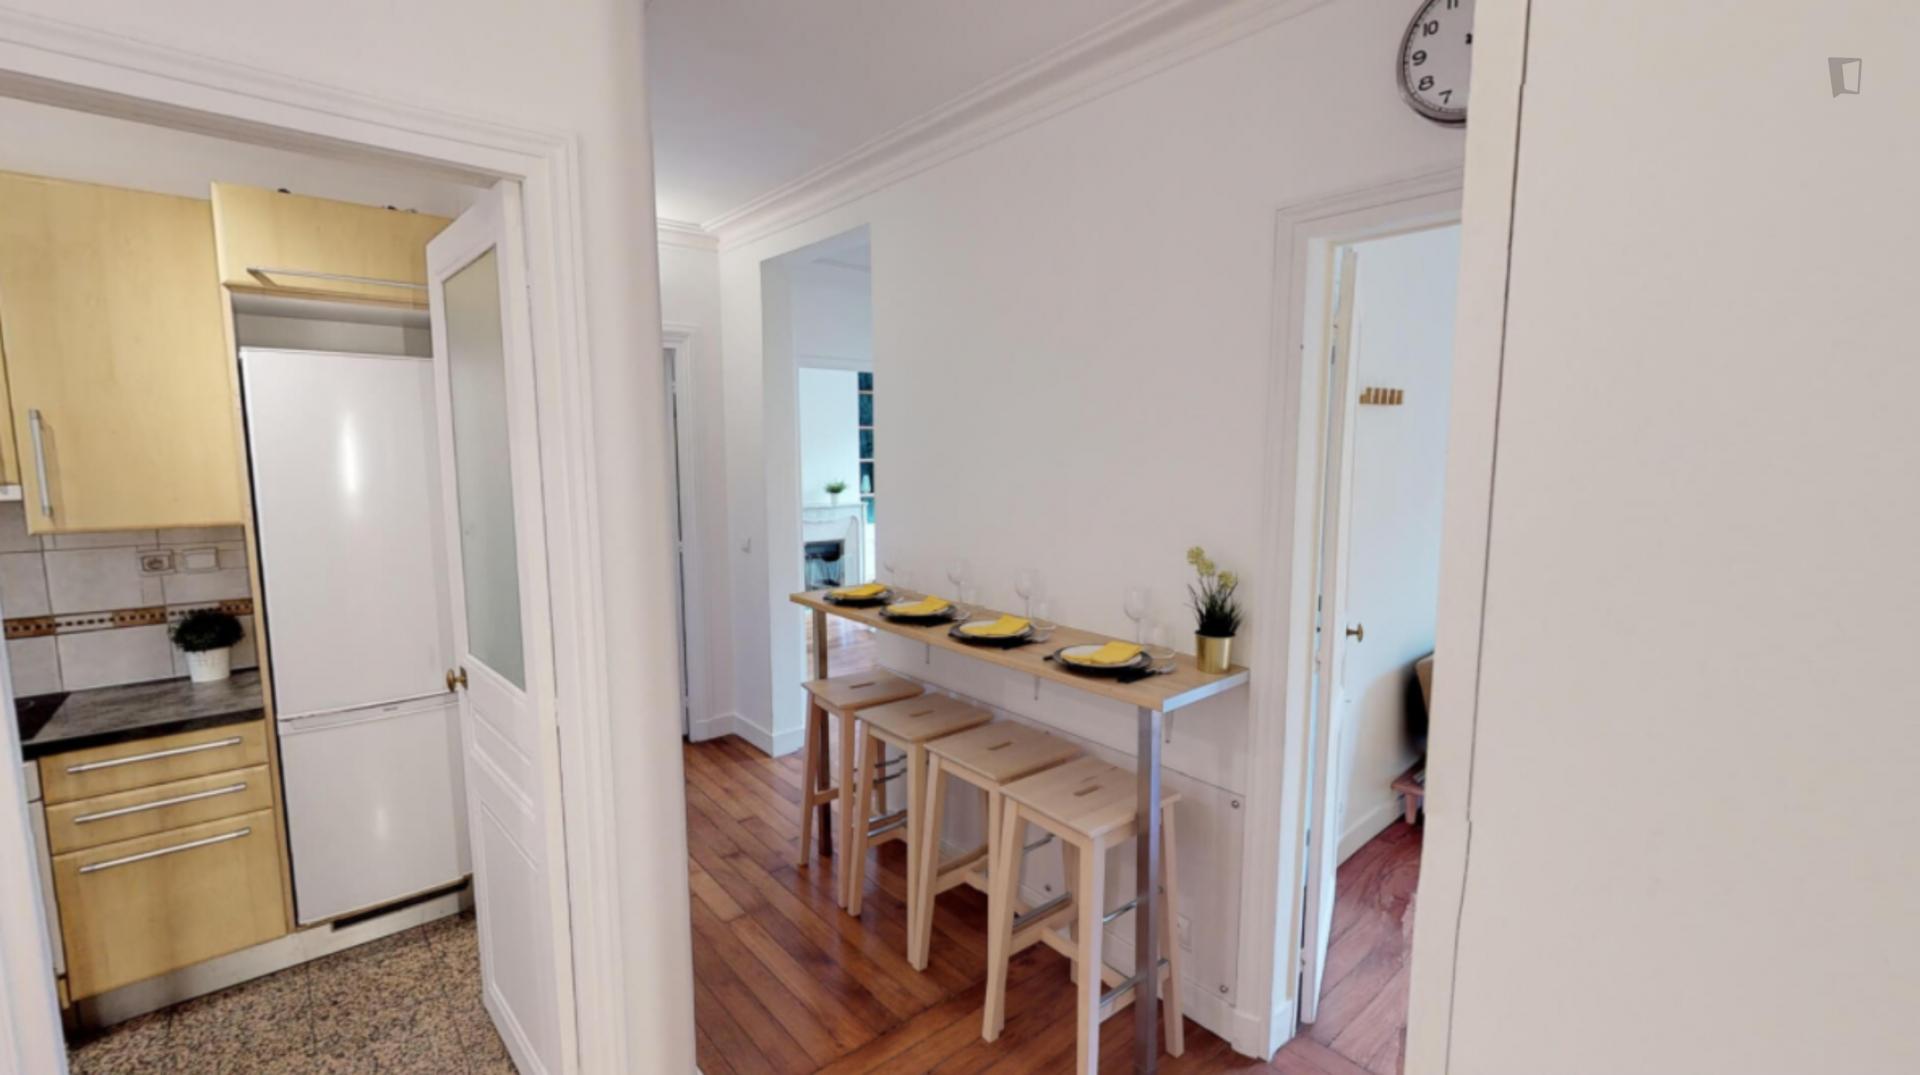 Marcel - Double room shared flat in Paris